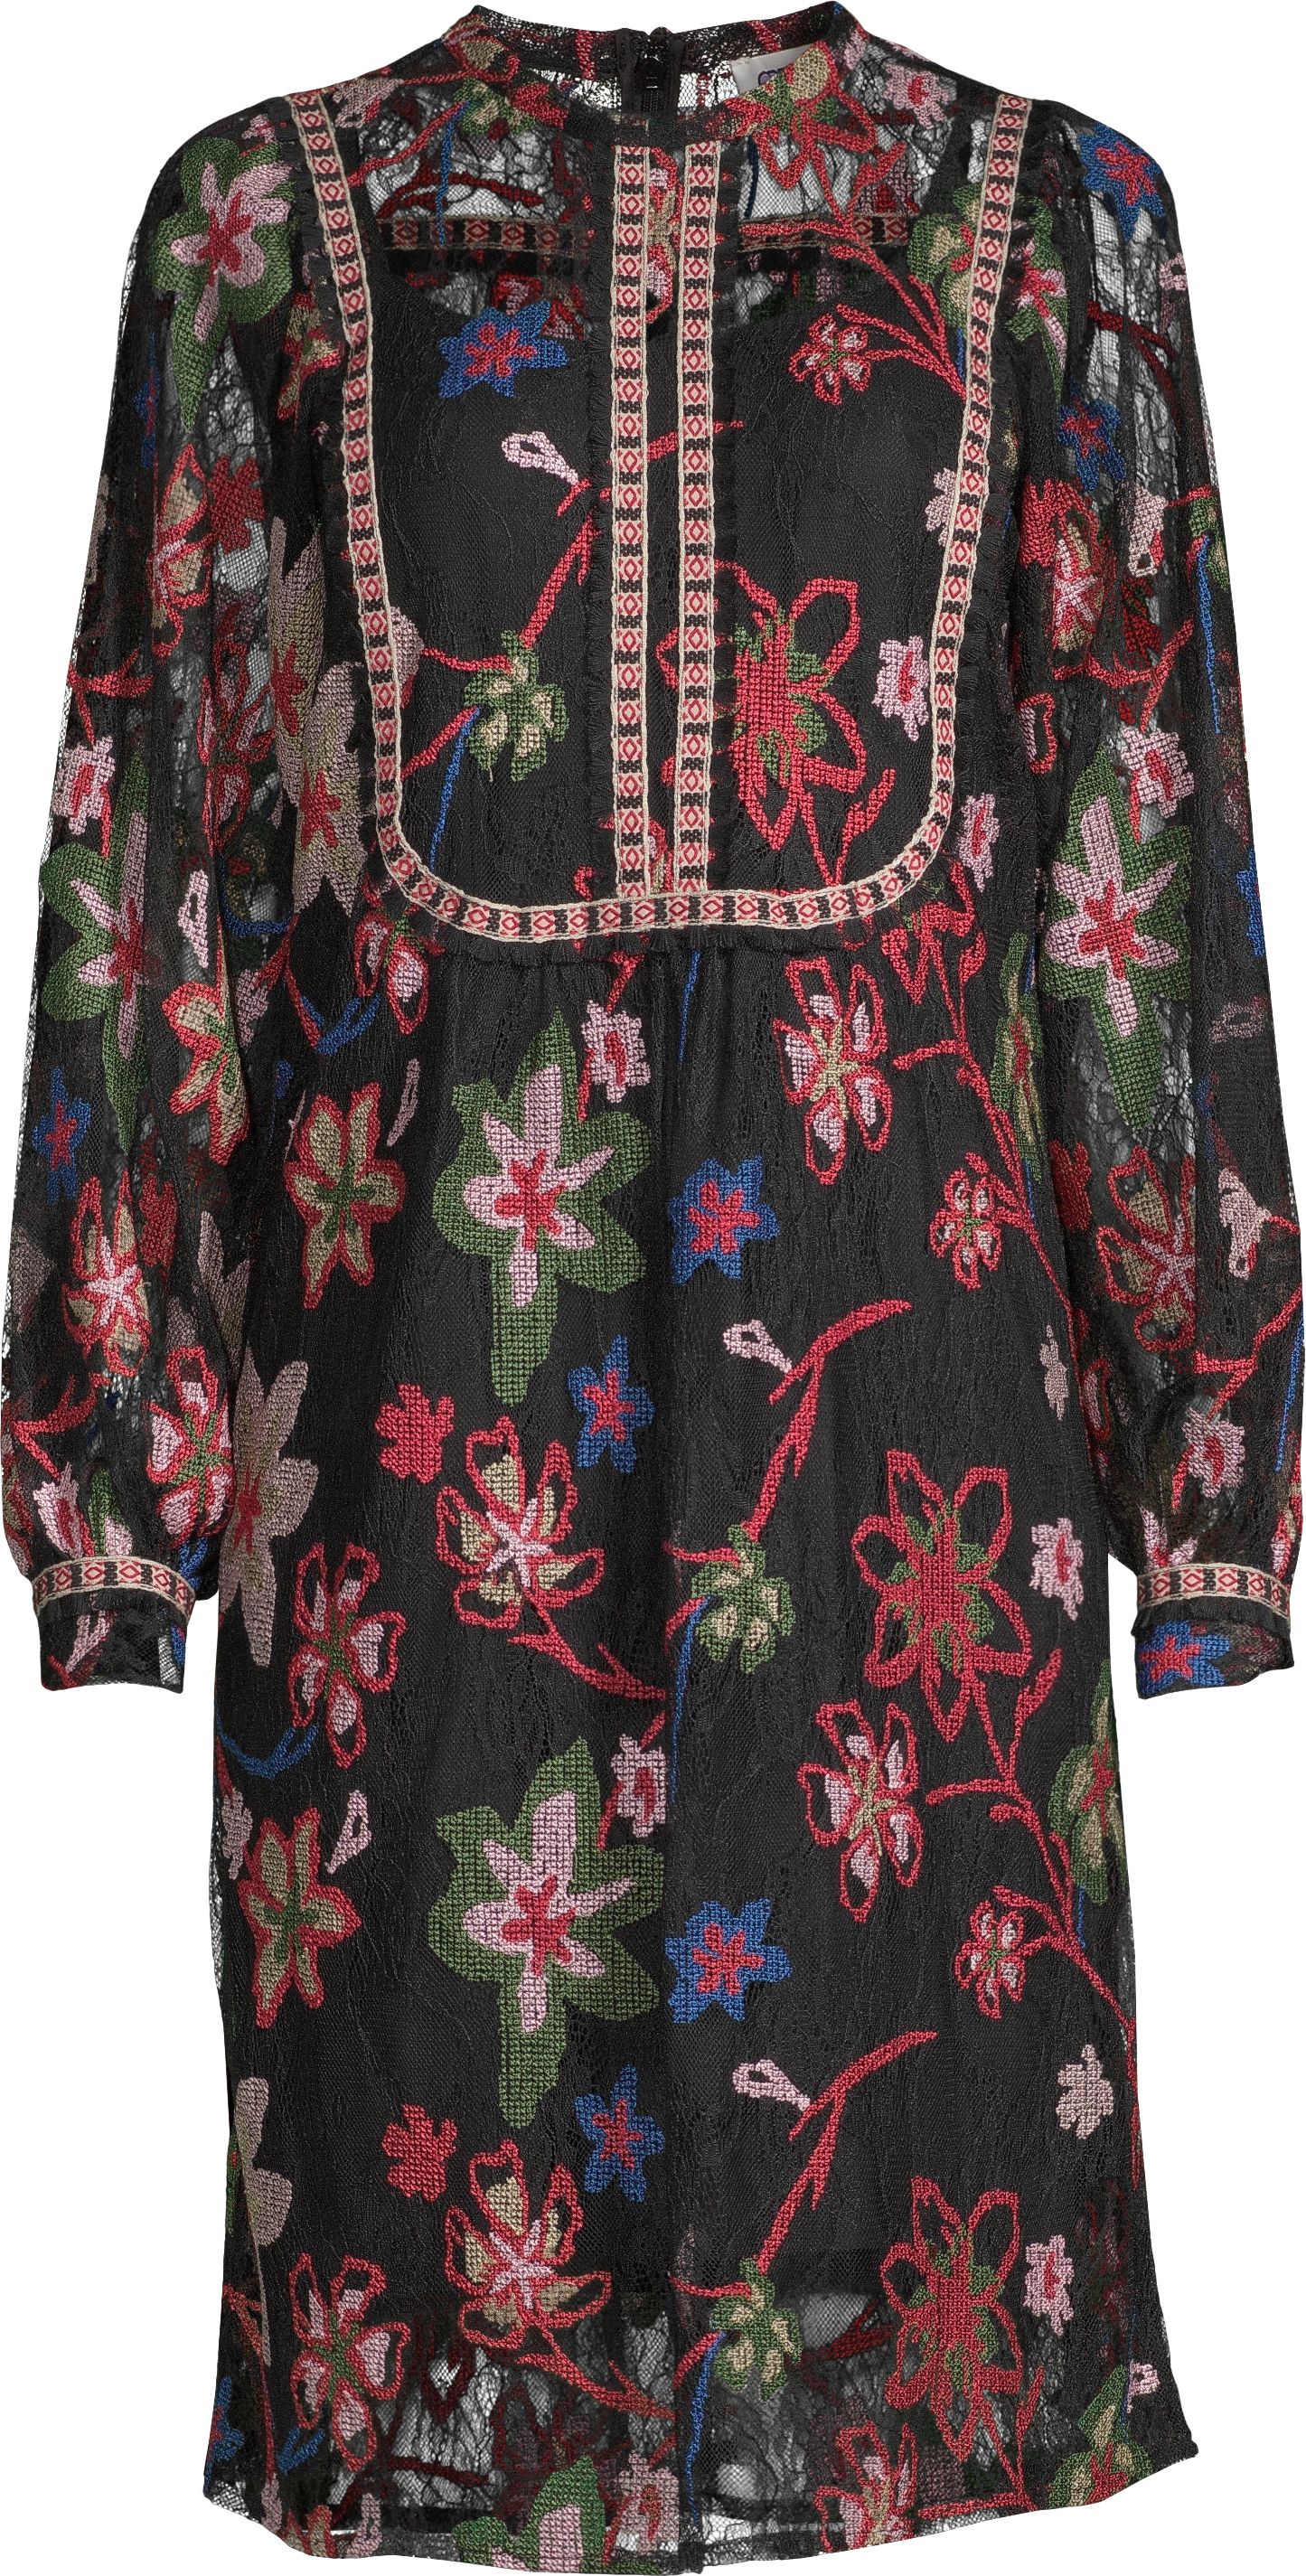 Sui by Anna Sui Women's Floral Embroidered Lace Dress - image 5 of 5